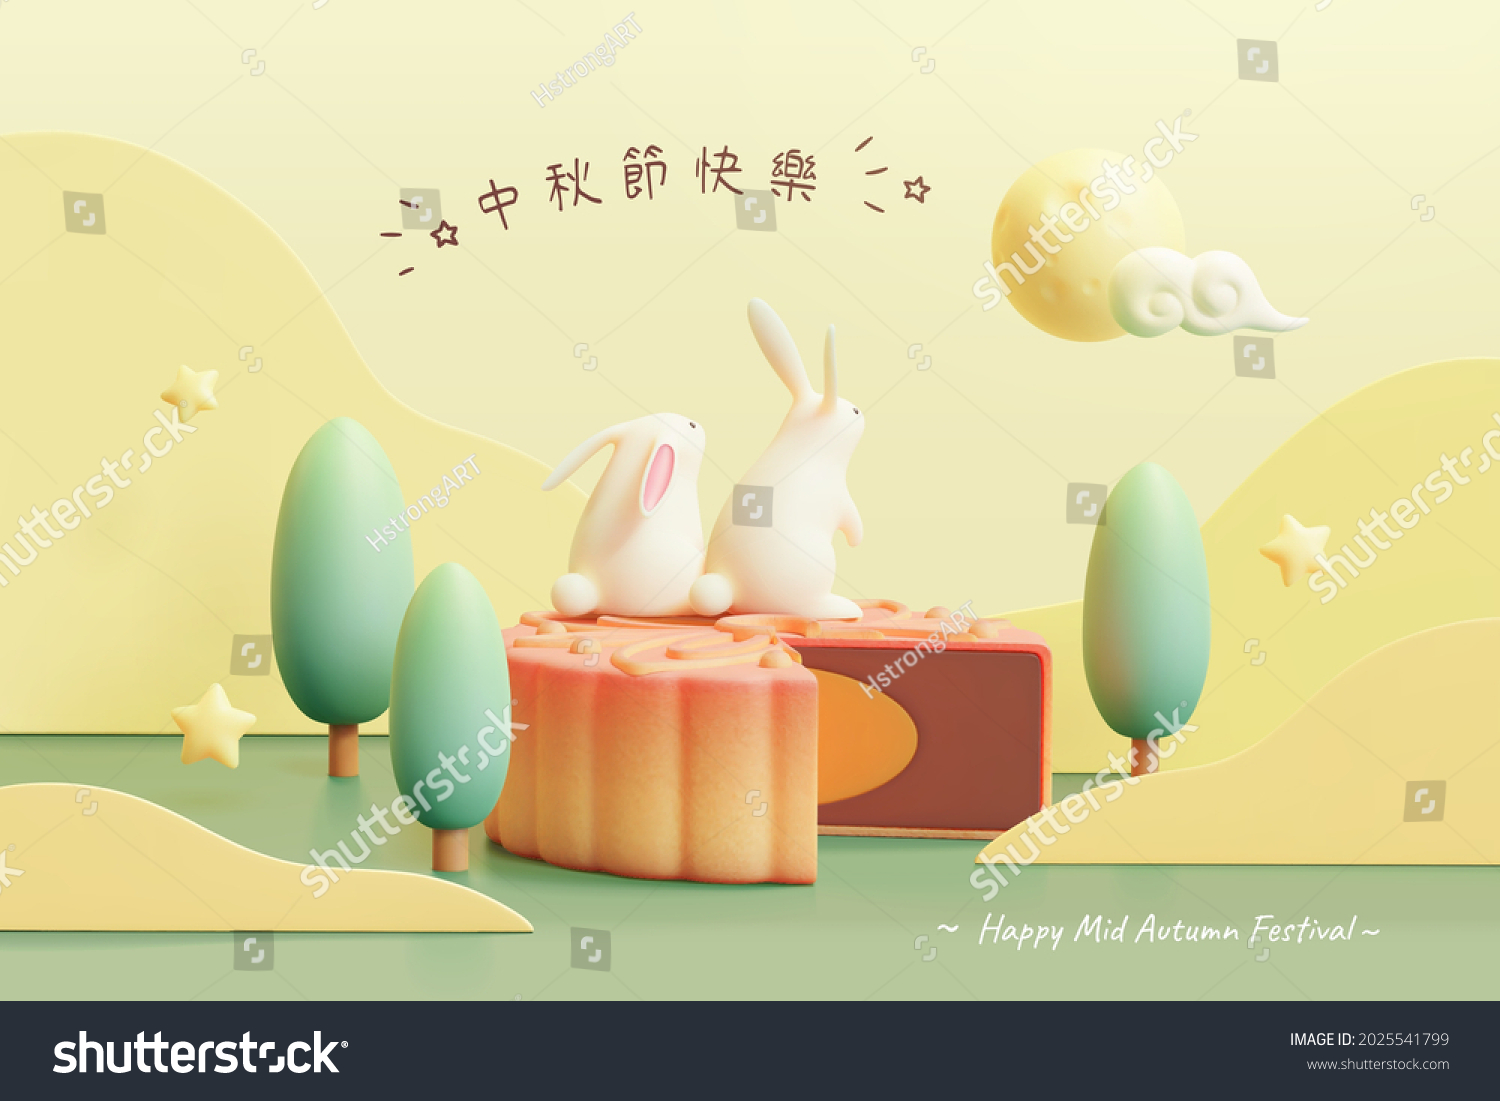 Creative Mid Autumn Festival or Chuseok greeting card. 3d illustration of two rabbits sitting on a moon cake and watching the full moon. Translation: Happy Mid Autumn Festival. #2025541799